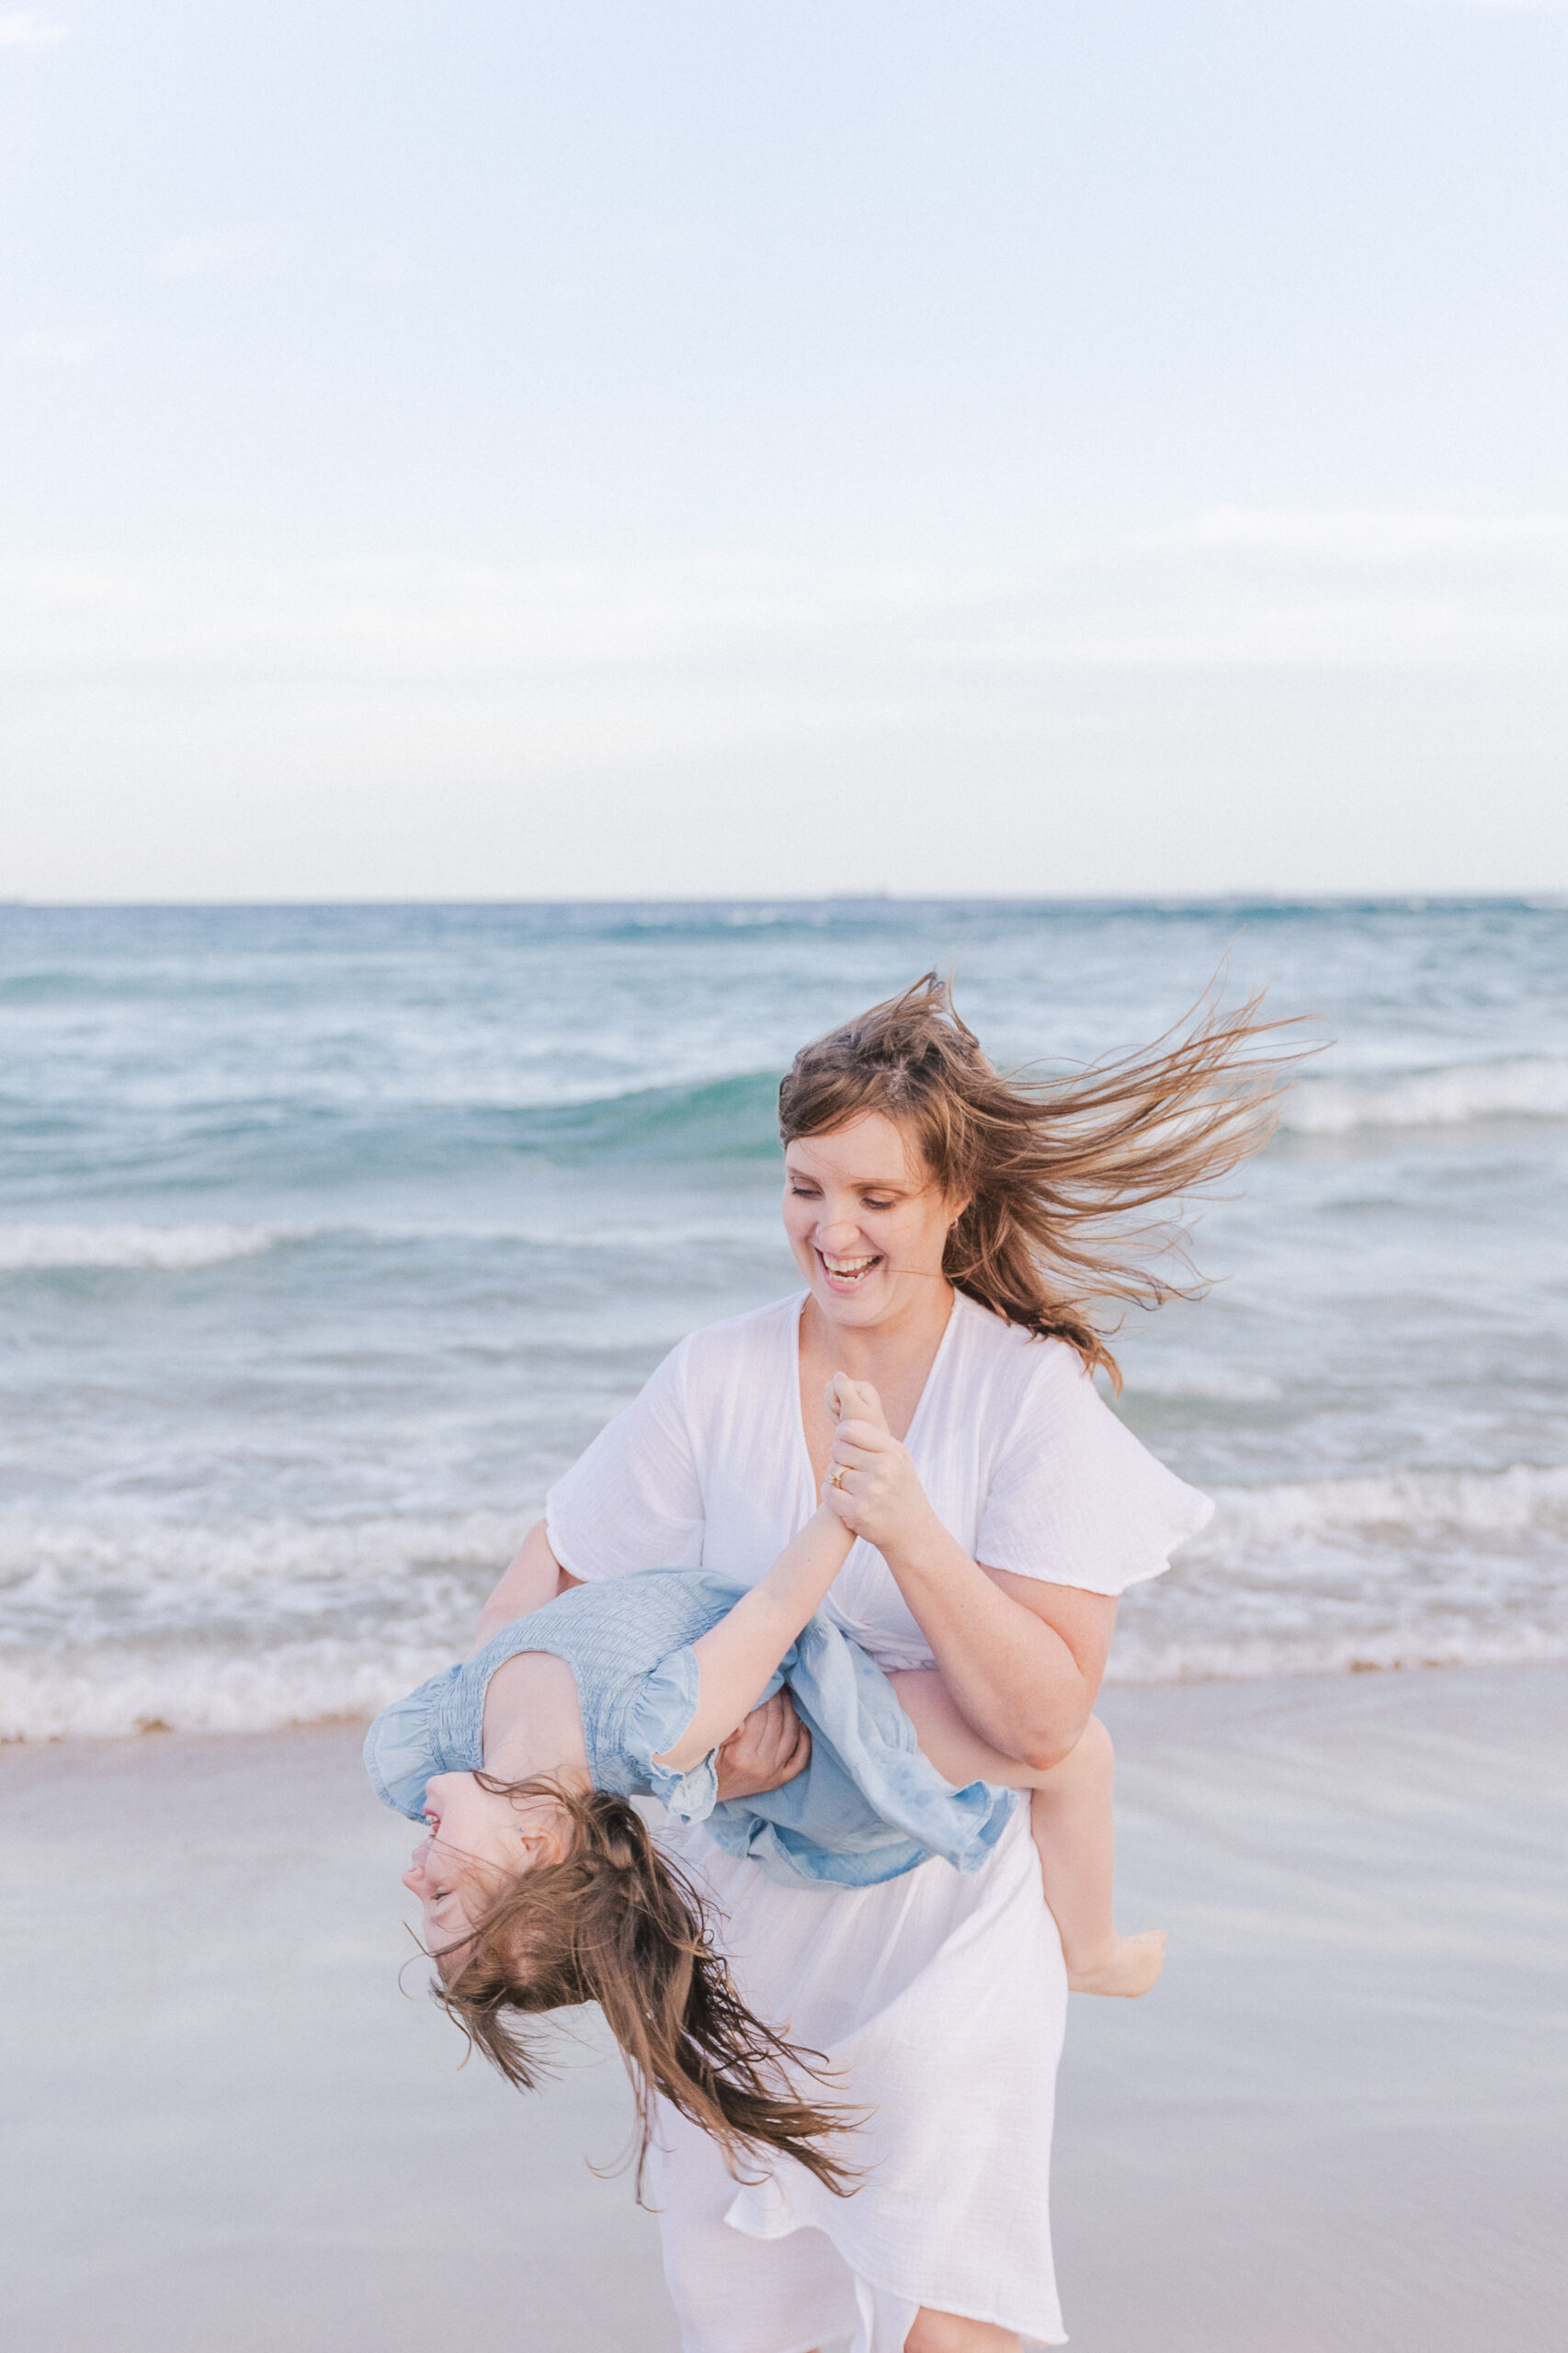 Mum wearing a white dress laughing and spinning her daughter around on the beach